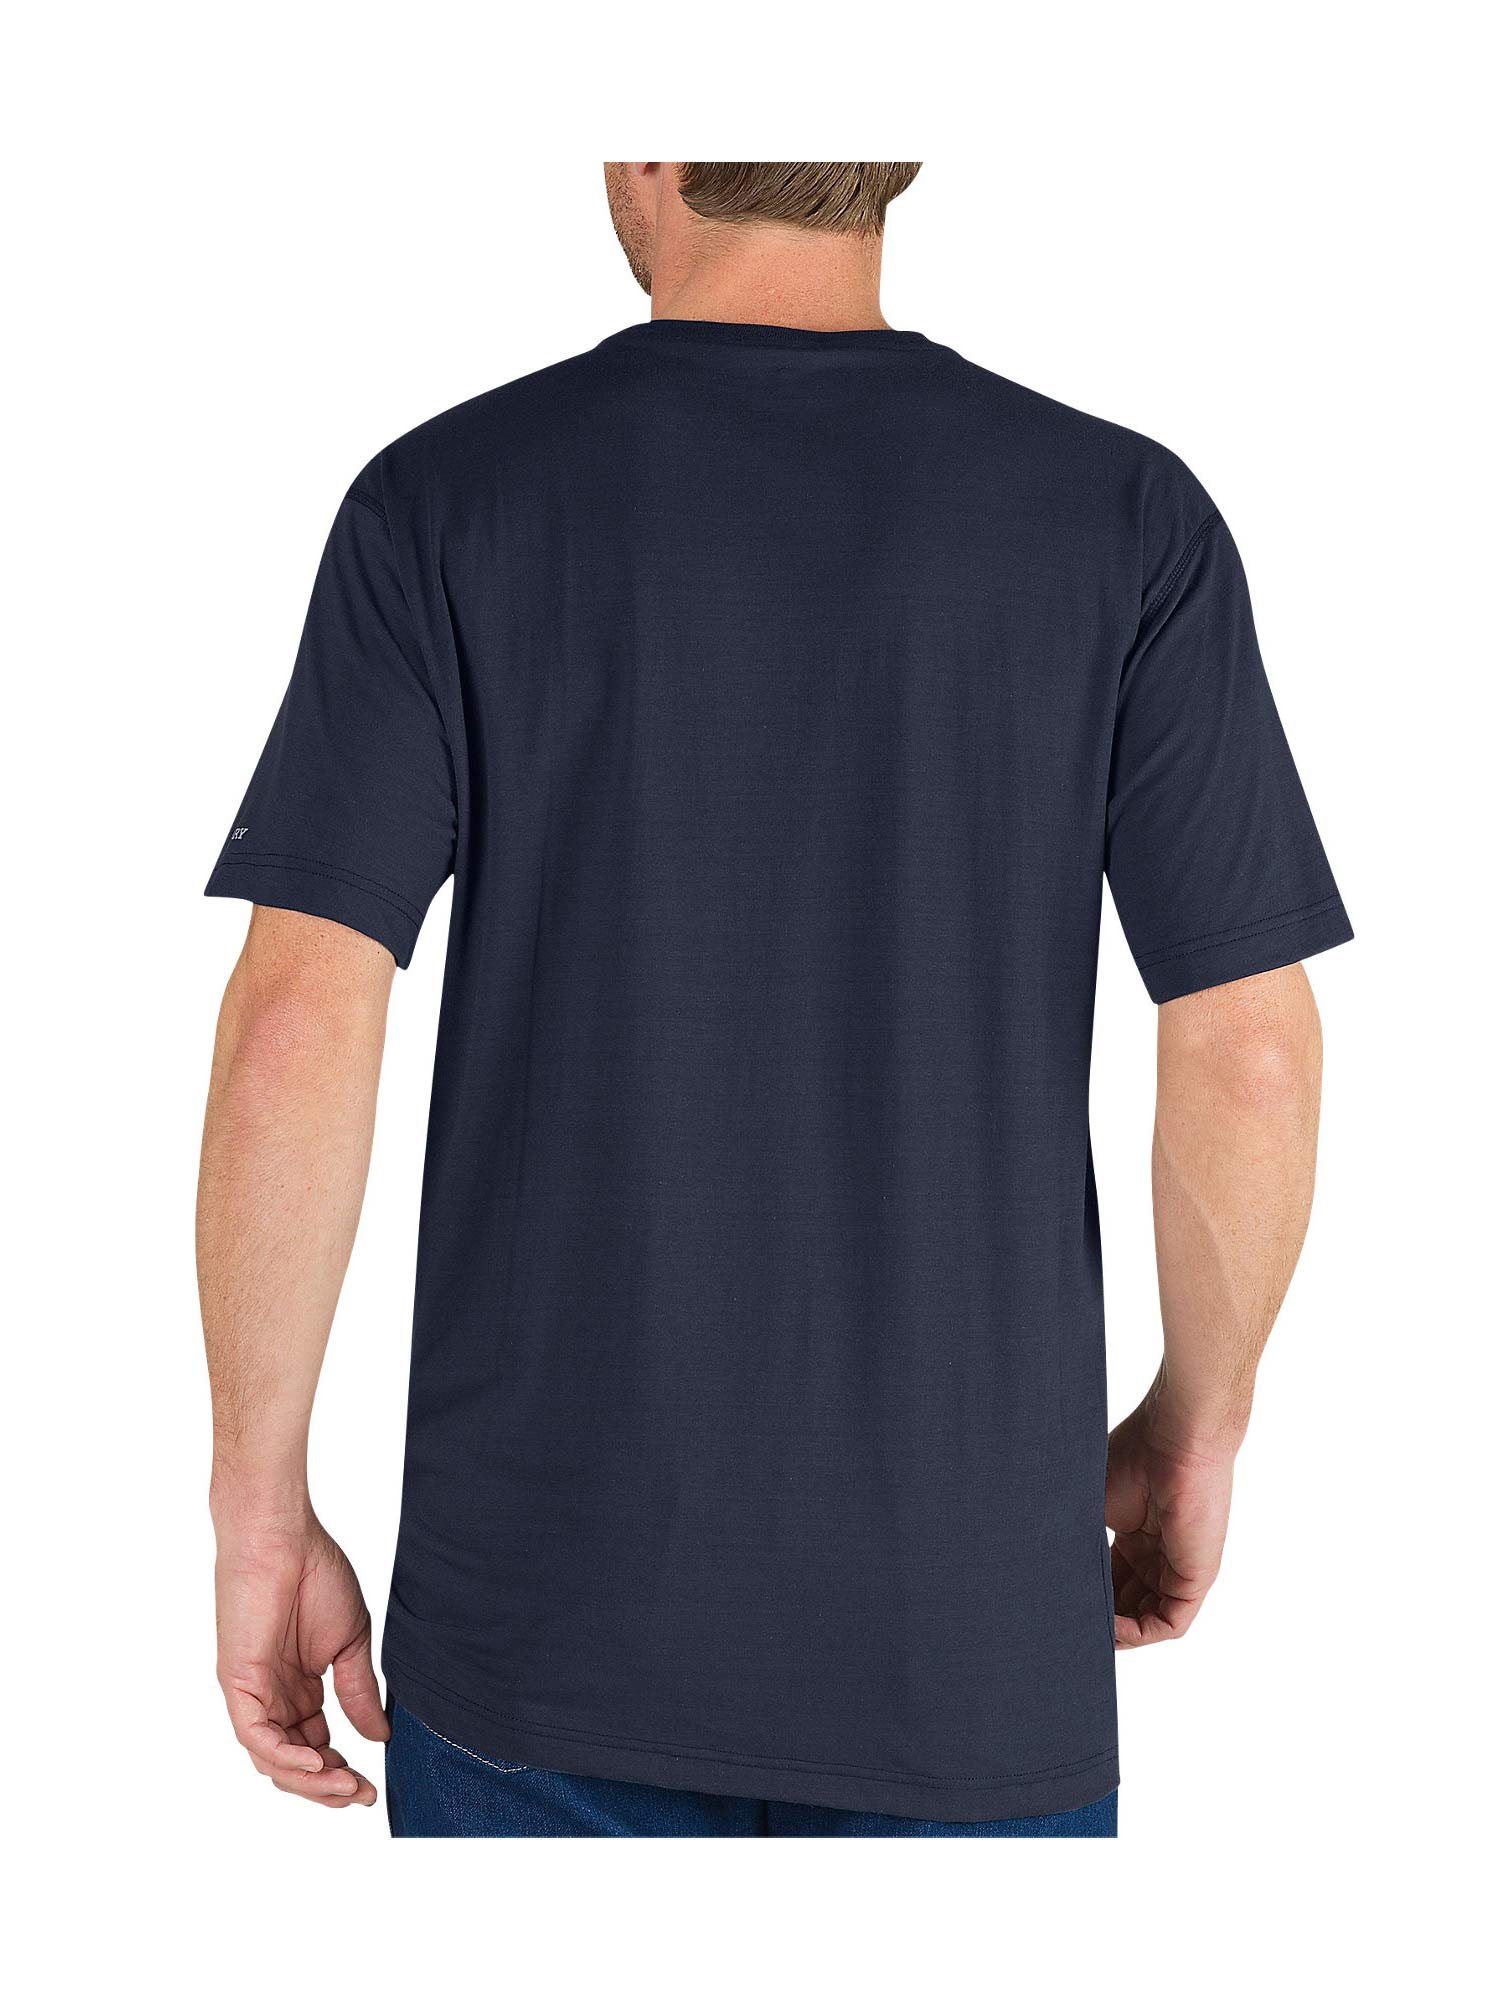 Dickies Performance drirelease® T-Shirt With Pocket - SS500